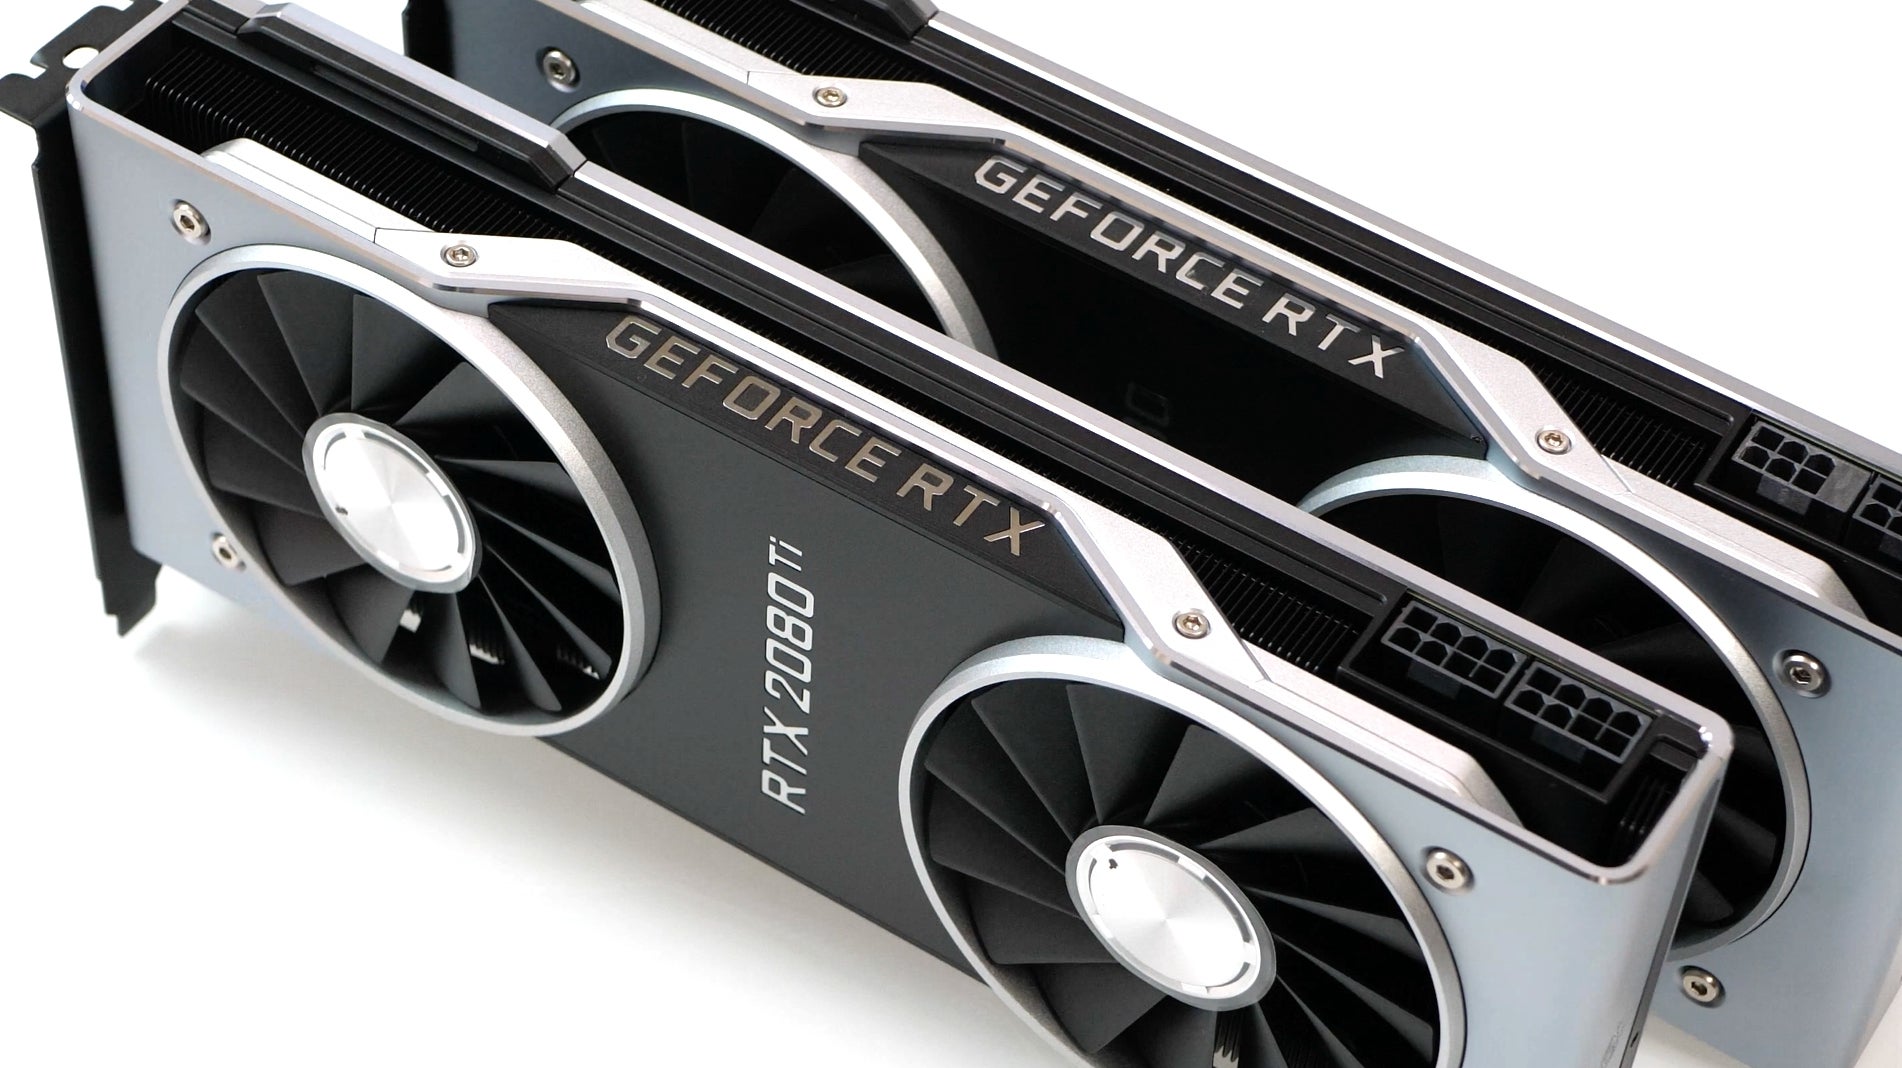 GeForce RTX 2080 and RTX 2080 Ti review: our first glimpse of next